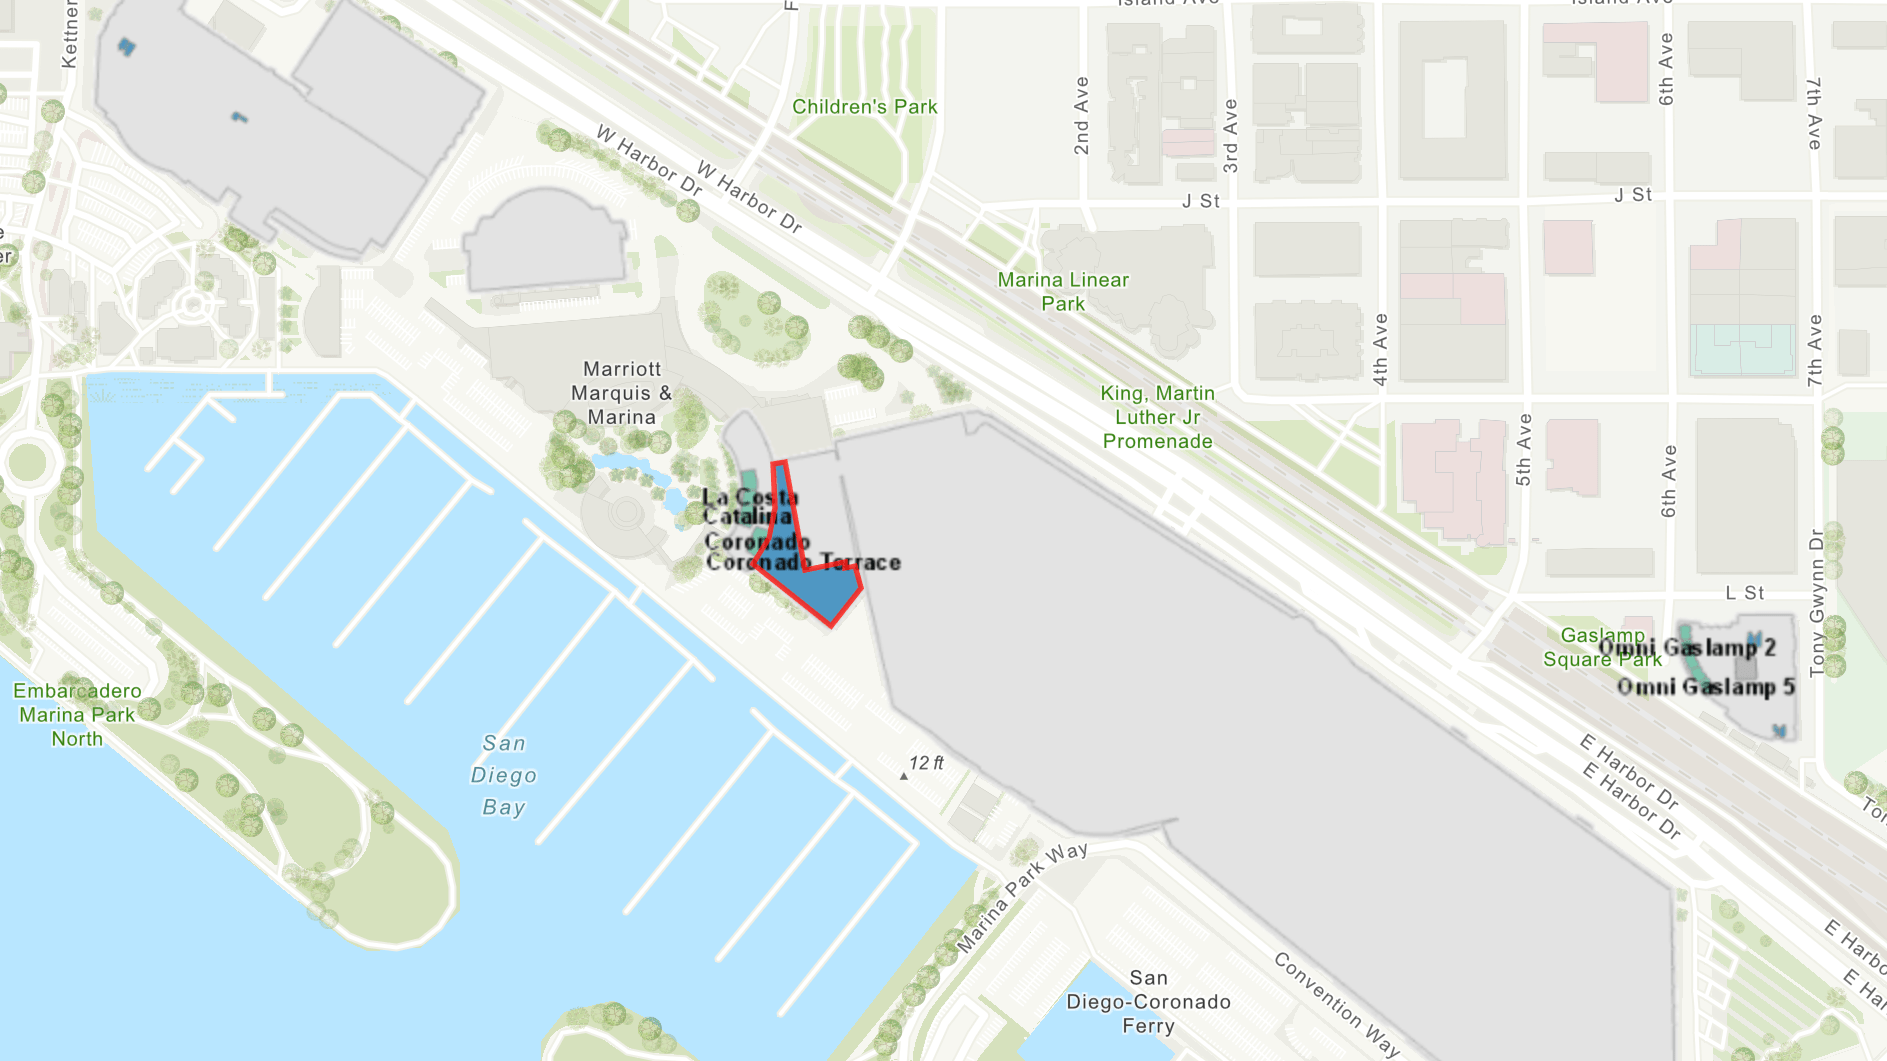 2019 Esri User Conference Socials We Recommend from Eos positioning Systems, a silver sponsor for the 2019 ESRI UC; shown here is a map of THE MARRIOTT CORONADO TERRACE IN SAN DIEOG